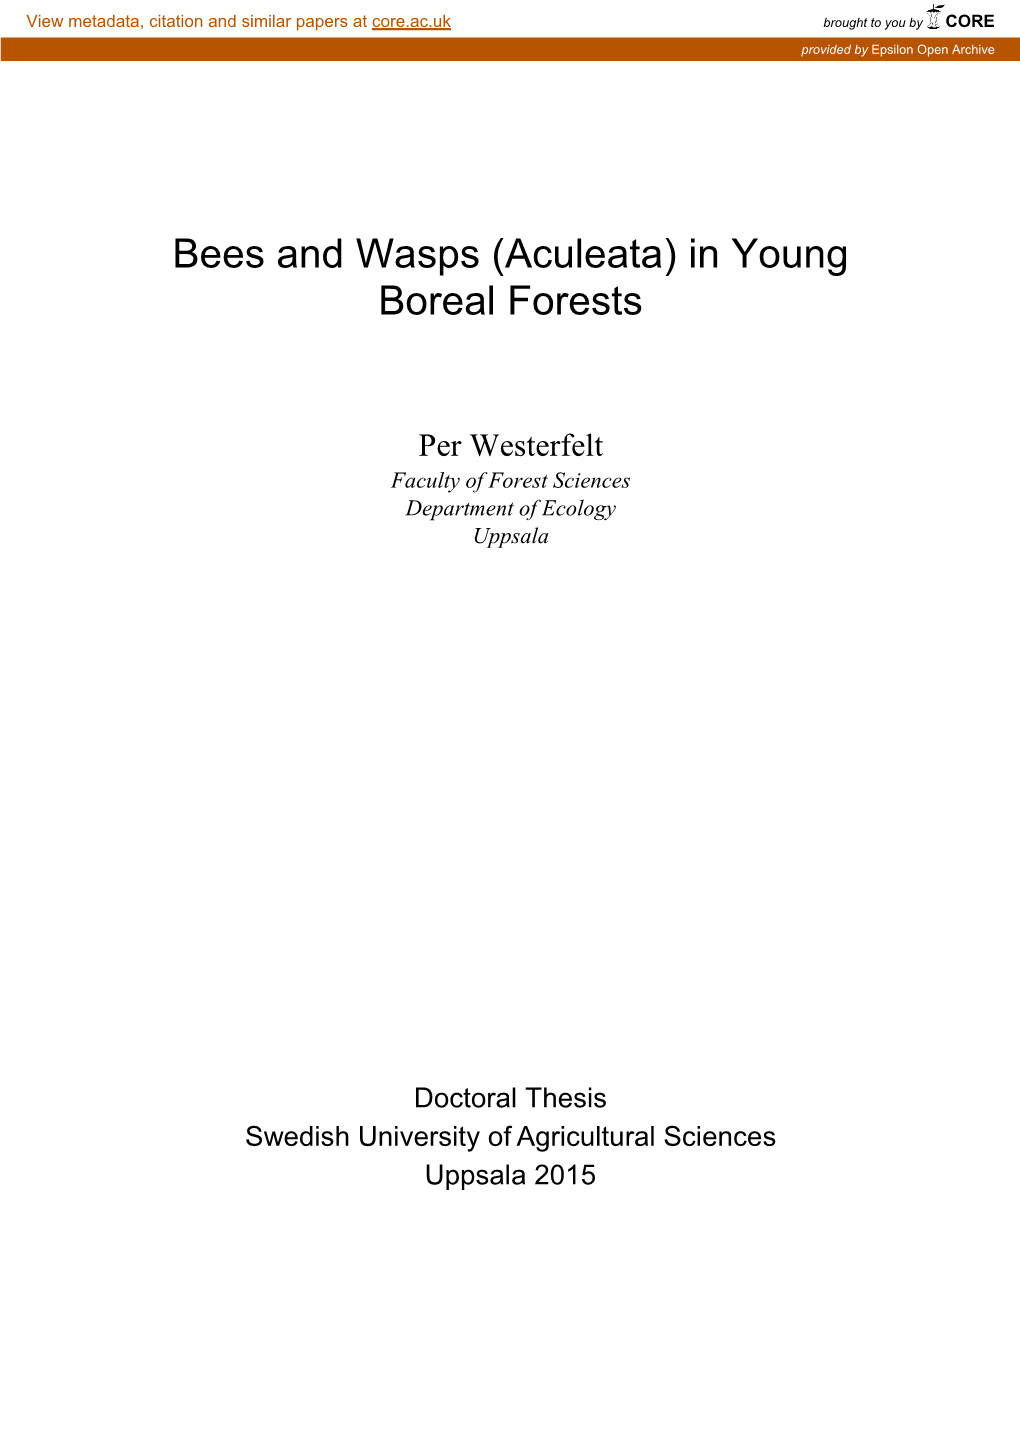 Bees and Wasps (Aculeata) in Young Boreal Forests